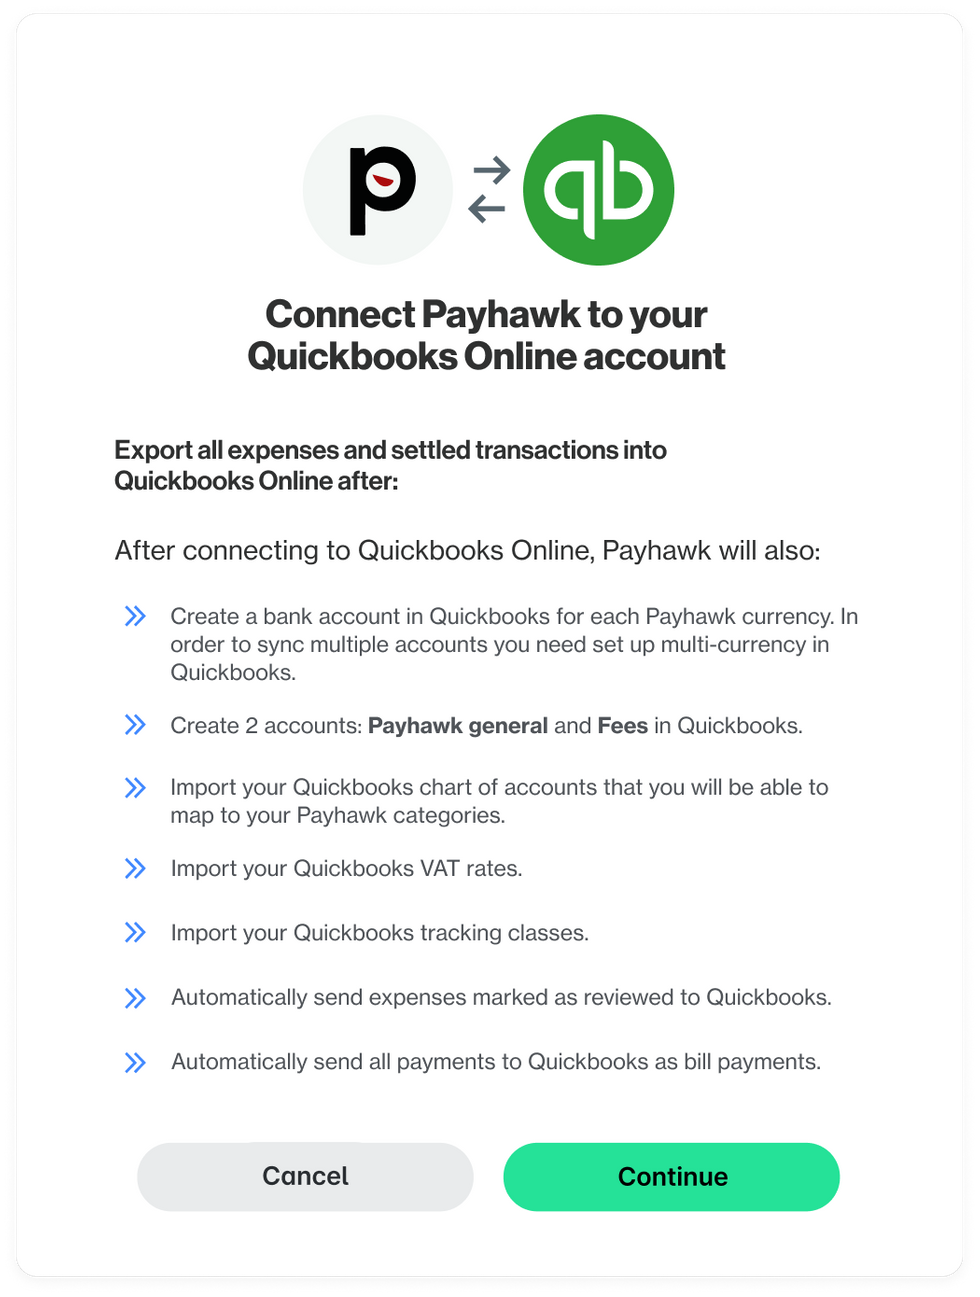 Seamlessly integrate quickbooks online with Payhawk (feature screenshot) 